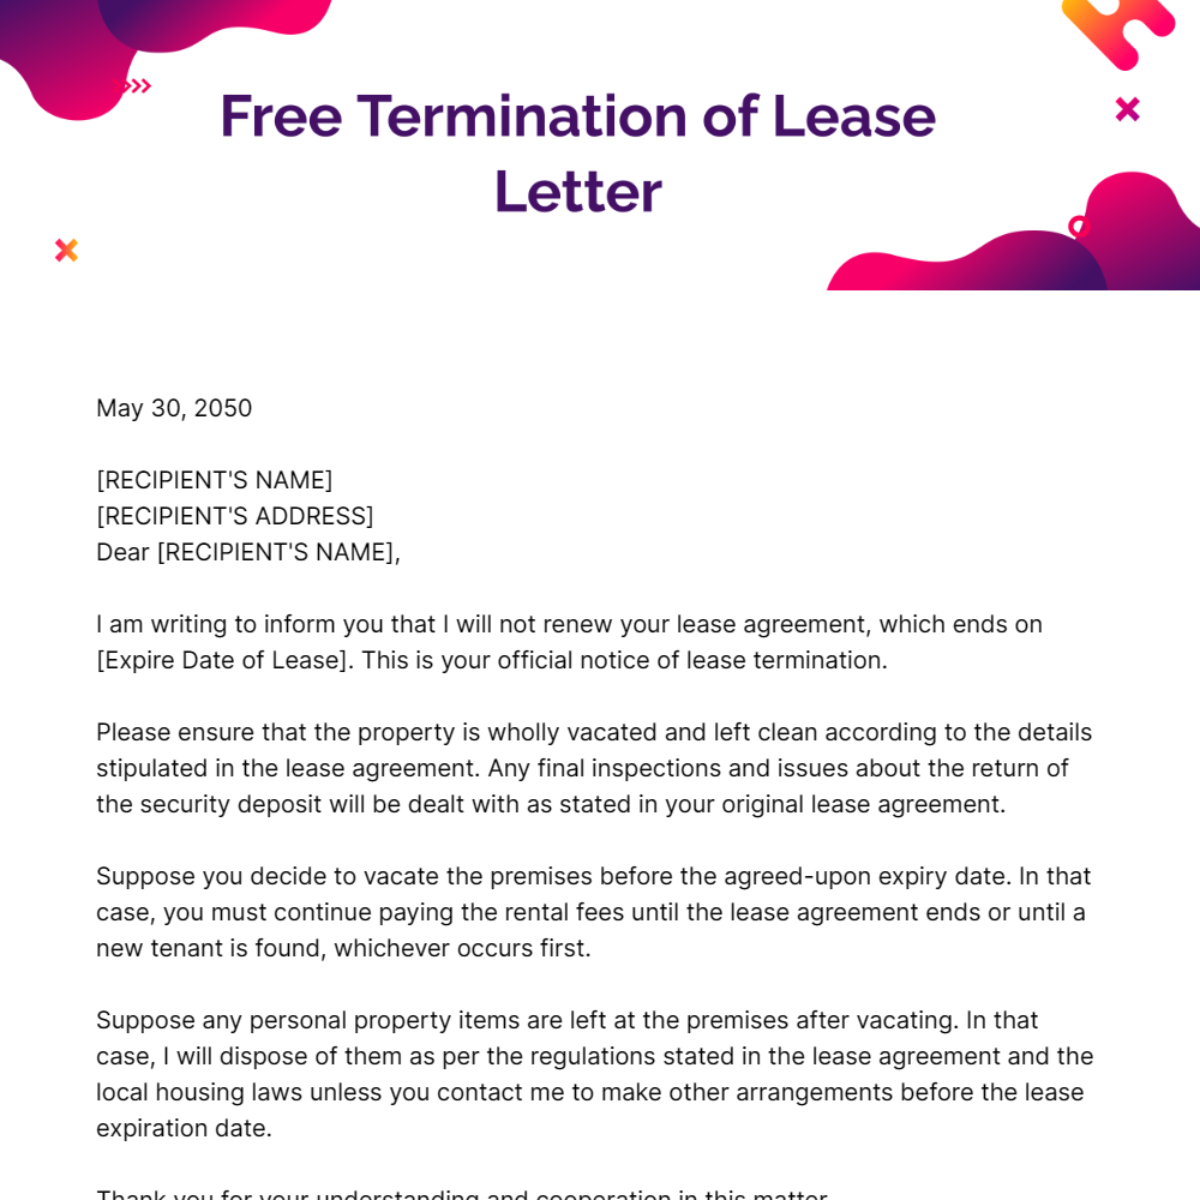 Termination of Lease Letter Template